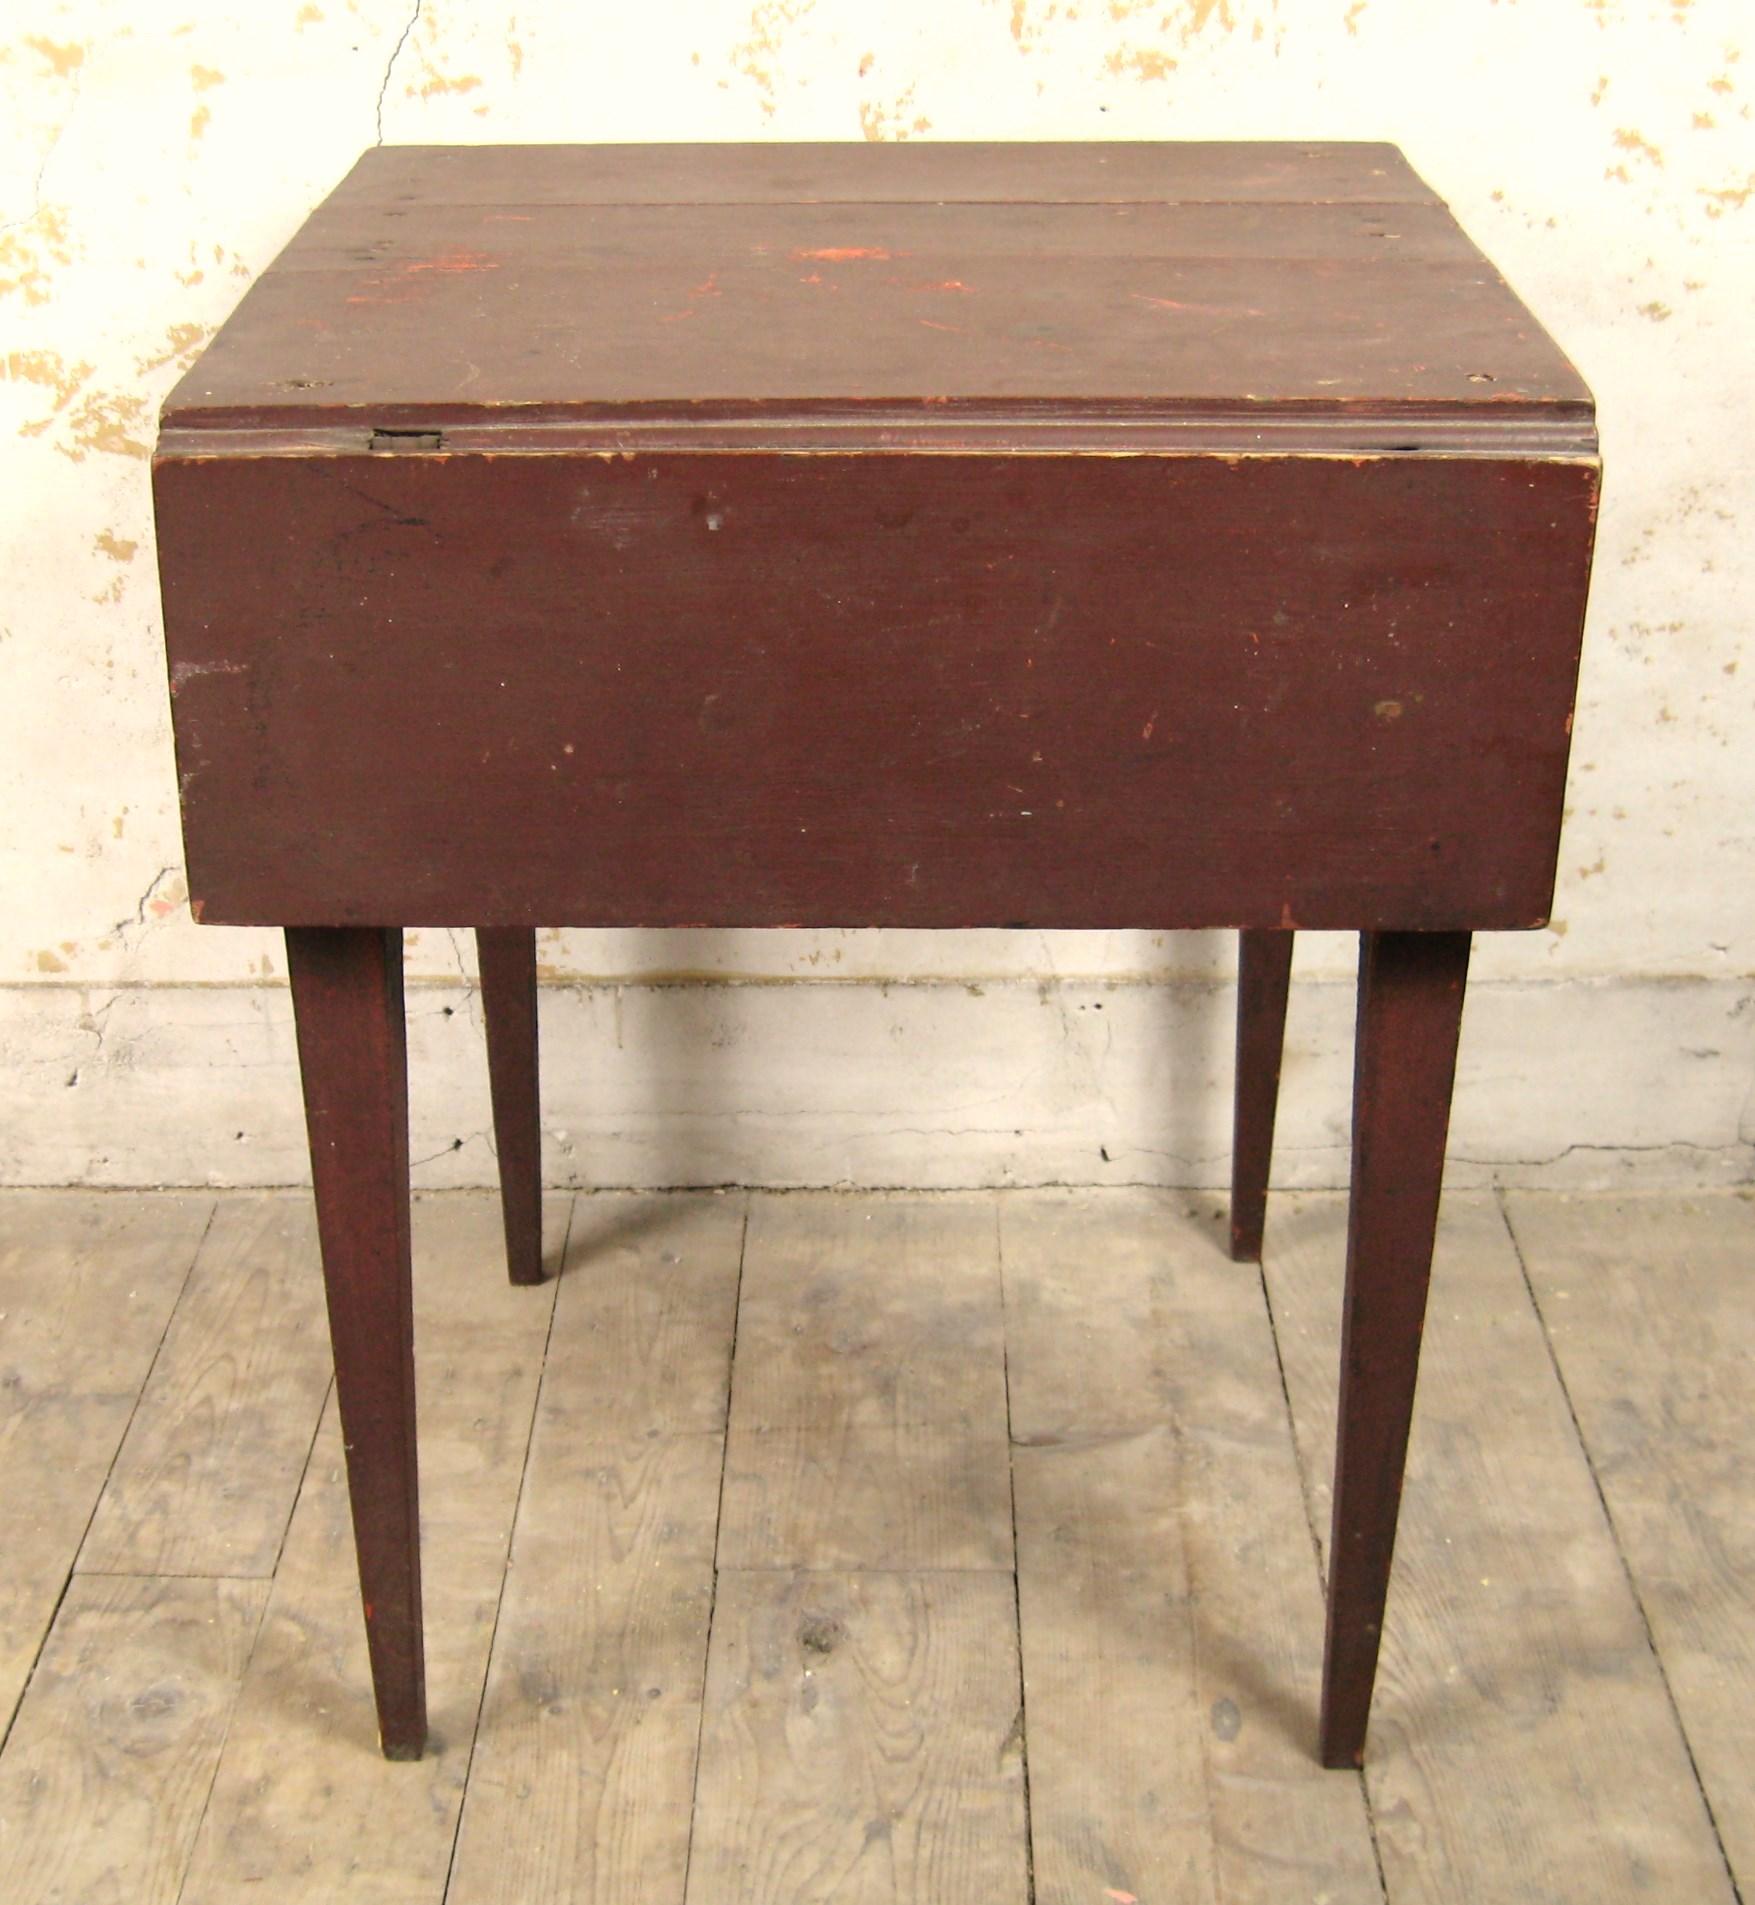 19th Century Primitive Farm workDrop leaf table with Tapered Leg 2